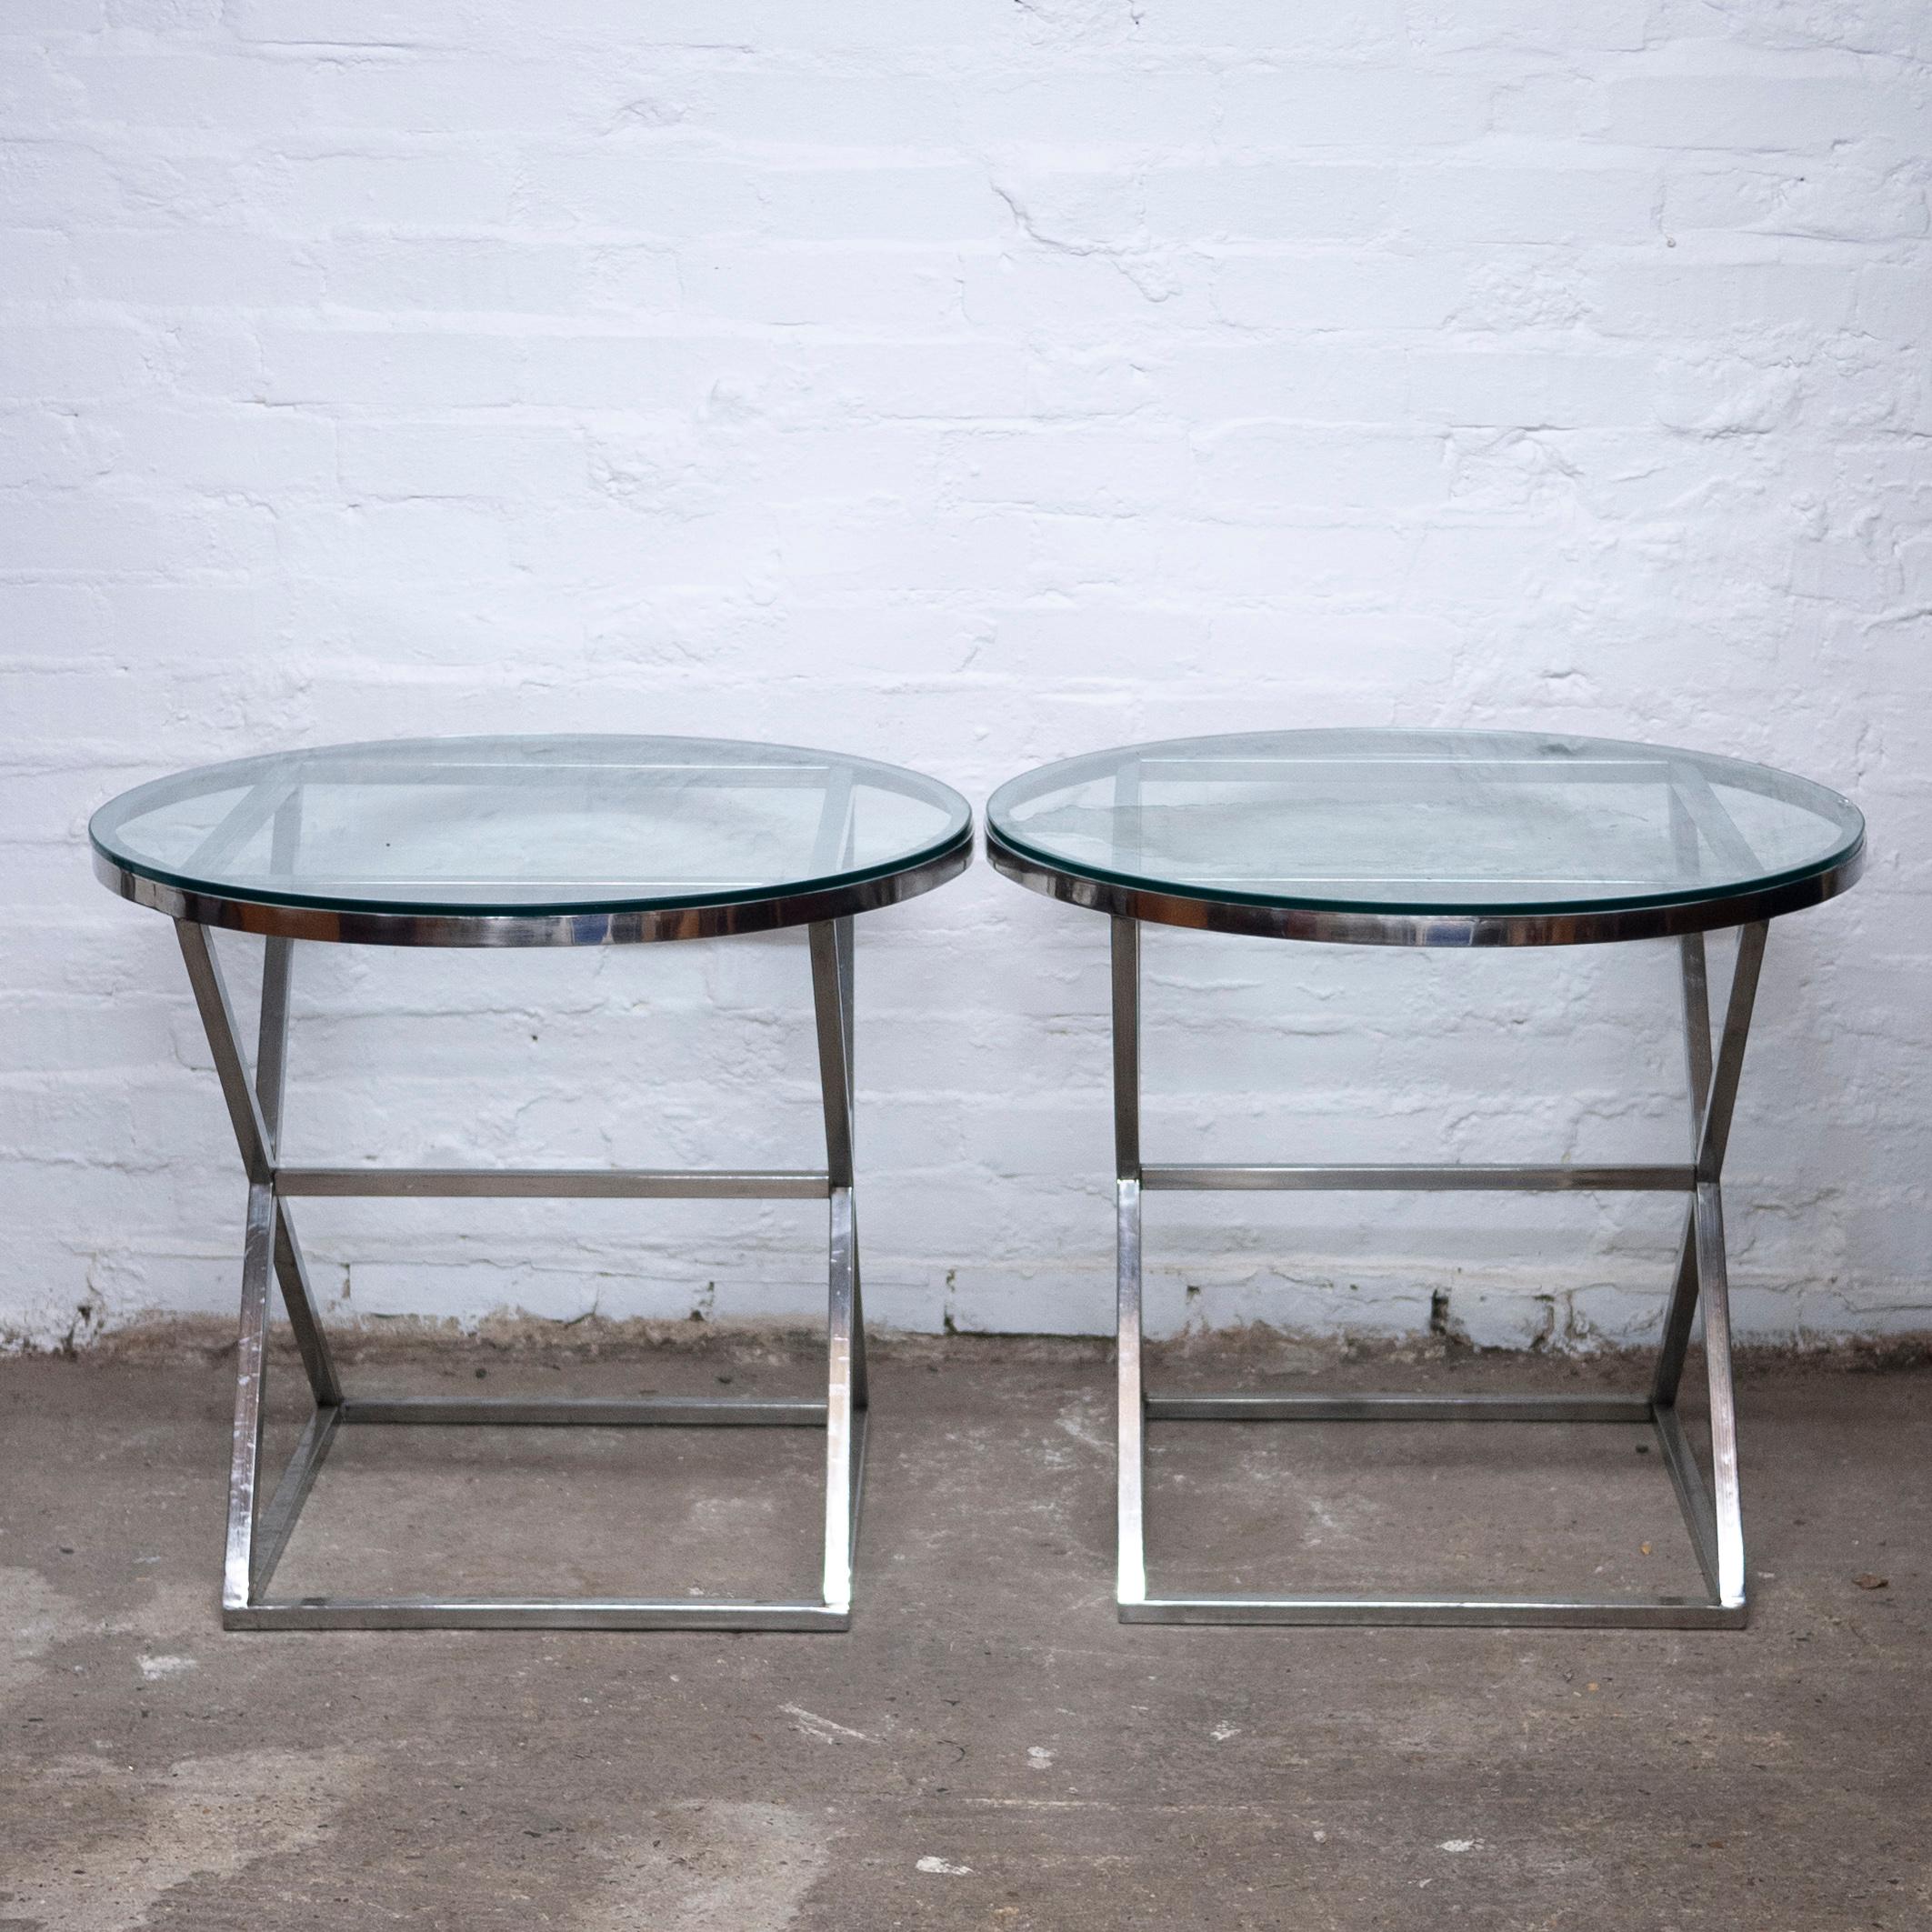 A pair of glass and metal side tables with a crossed base designed.

Designer - Casa Padrino

Design Period - 1990 to 1999

Style - Vintage

Detailed Condition - Good with minimal defects.

Restoration and Damage Details - Light wear consistent with